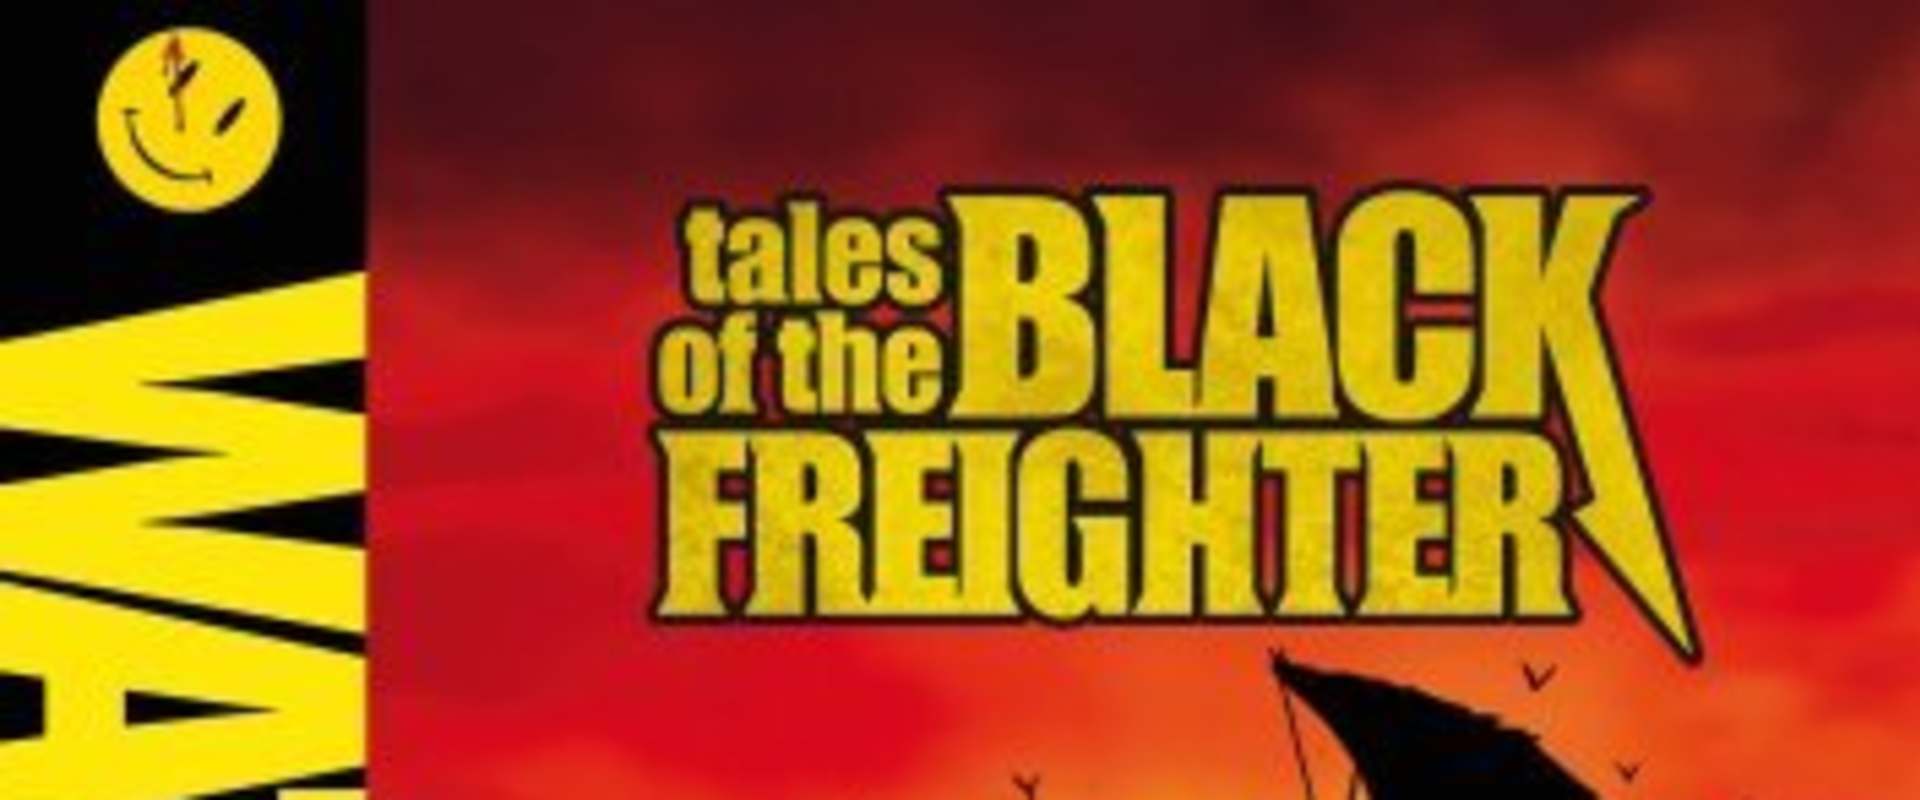 Tales of the Black Freighter background 1